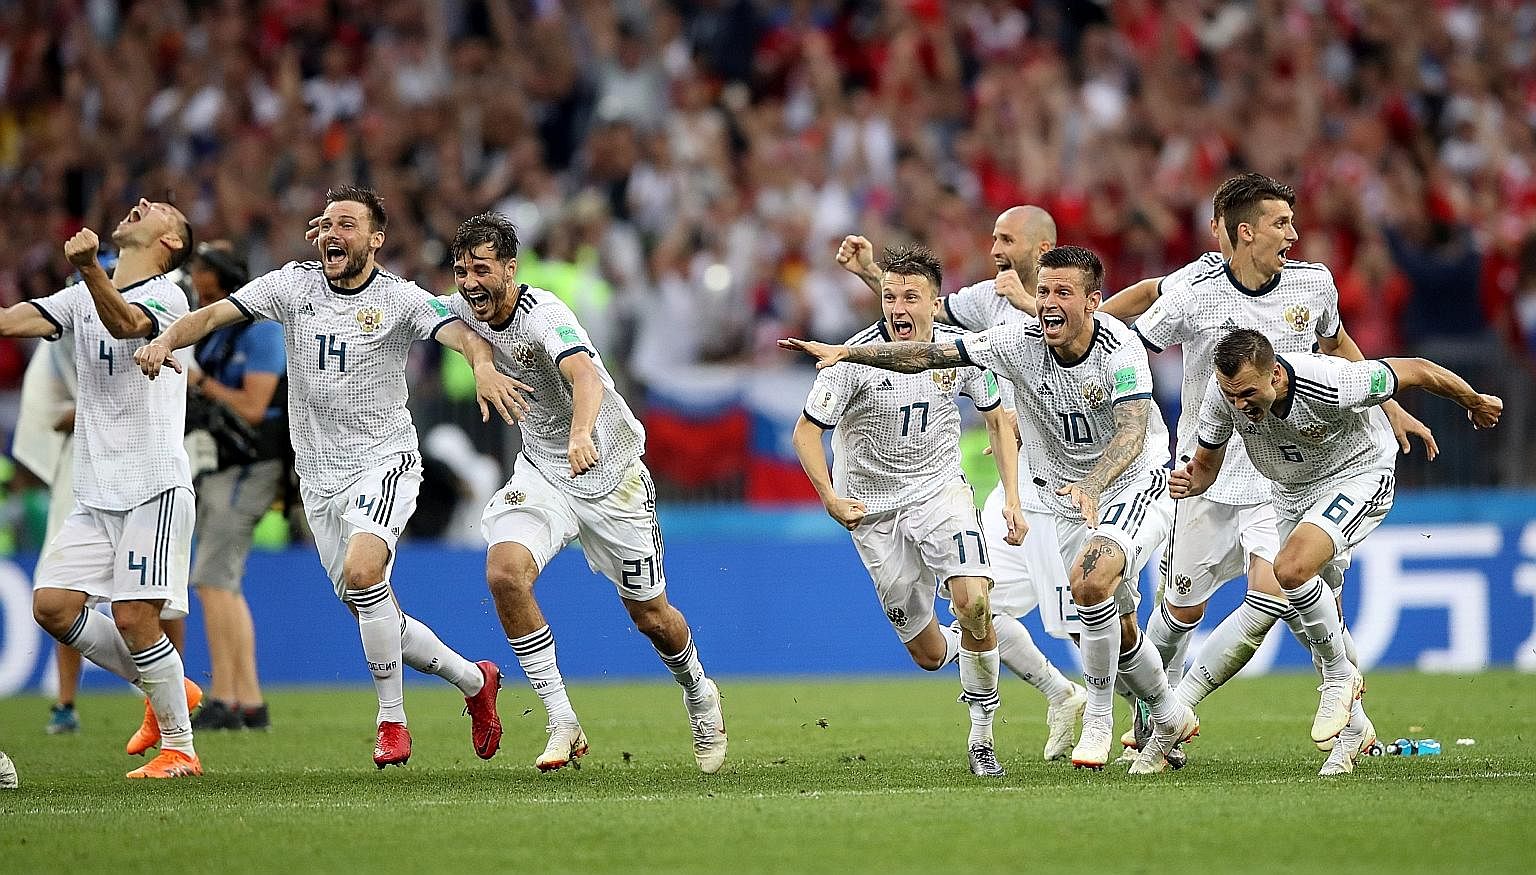 Russia celebrated one of their most famous wins at the World Cup in Moscow yesterday when they defeated 2010 champions Spain 4-3 in a penalty shoot-out to reach the quarter-finals. The last-16 match had ended 1-1 on full-time. Goalkeeper Igor Akinfee